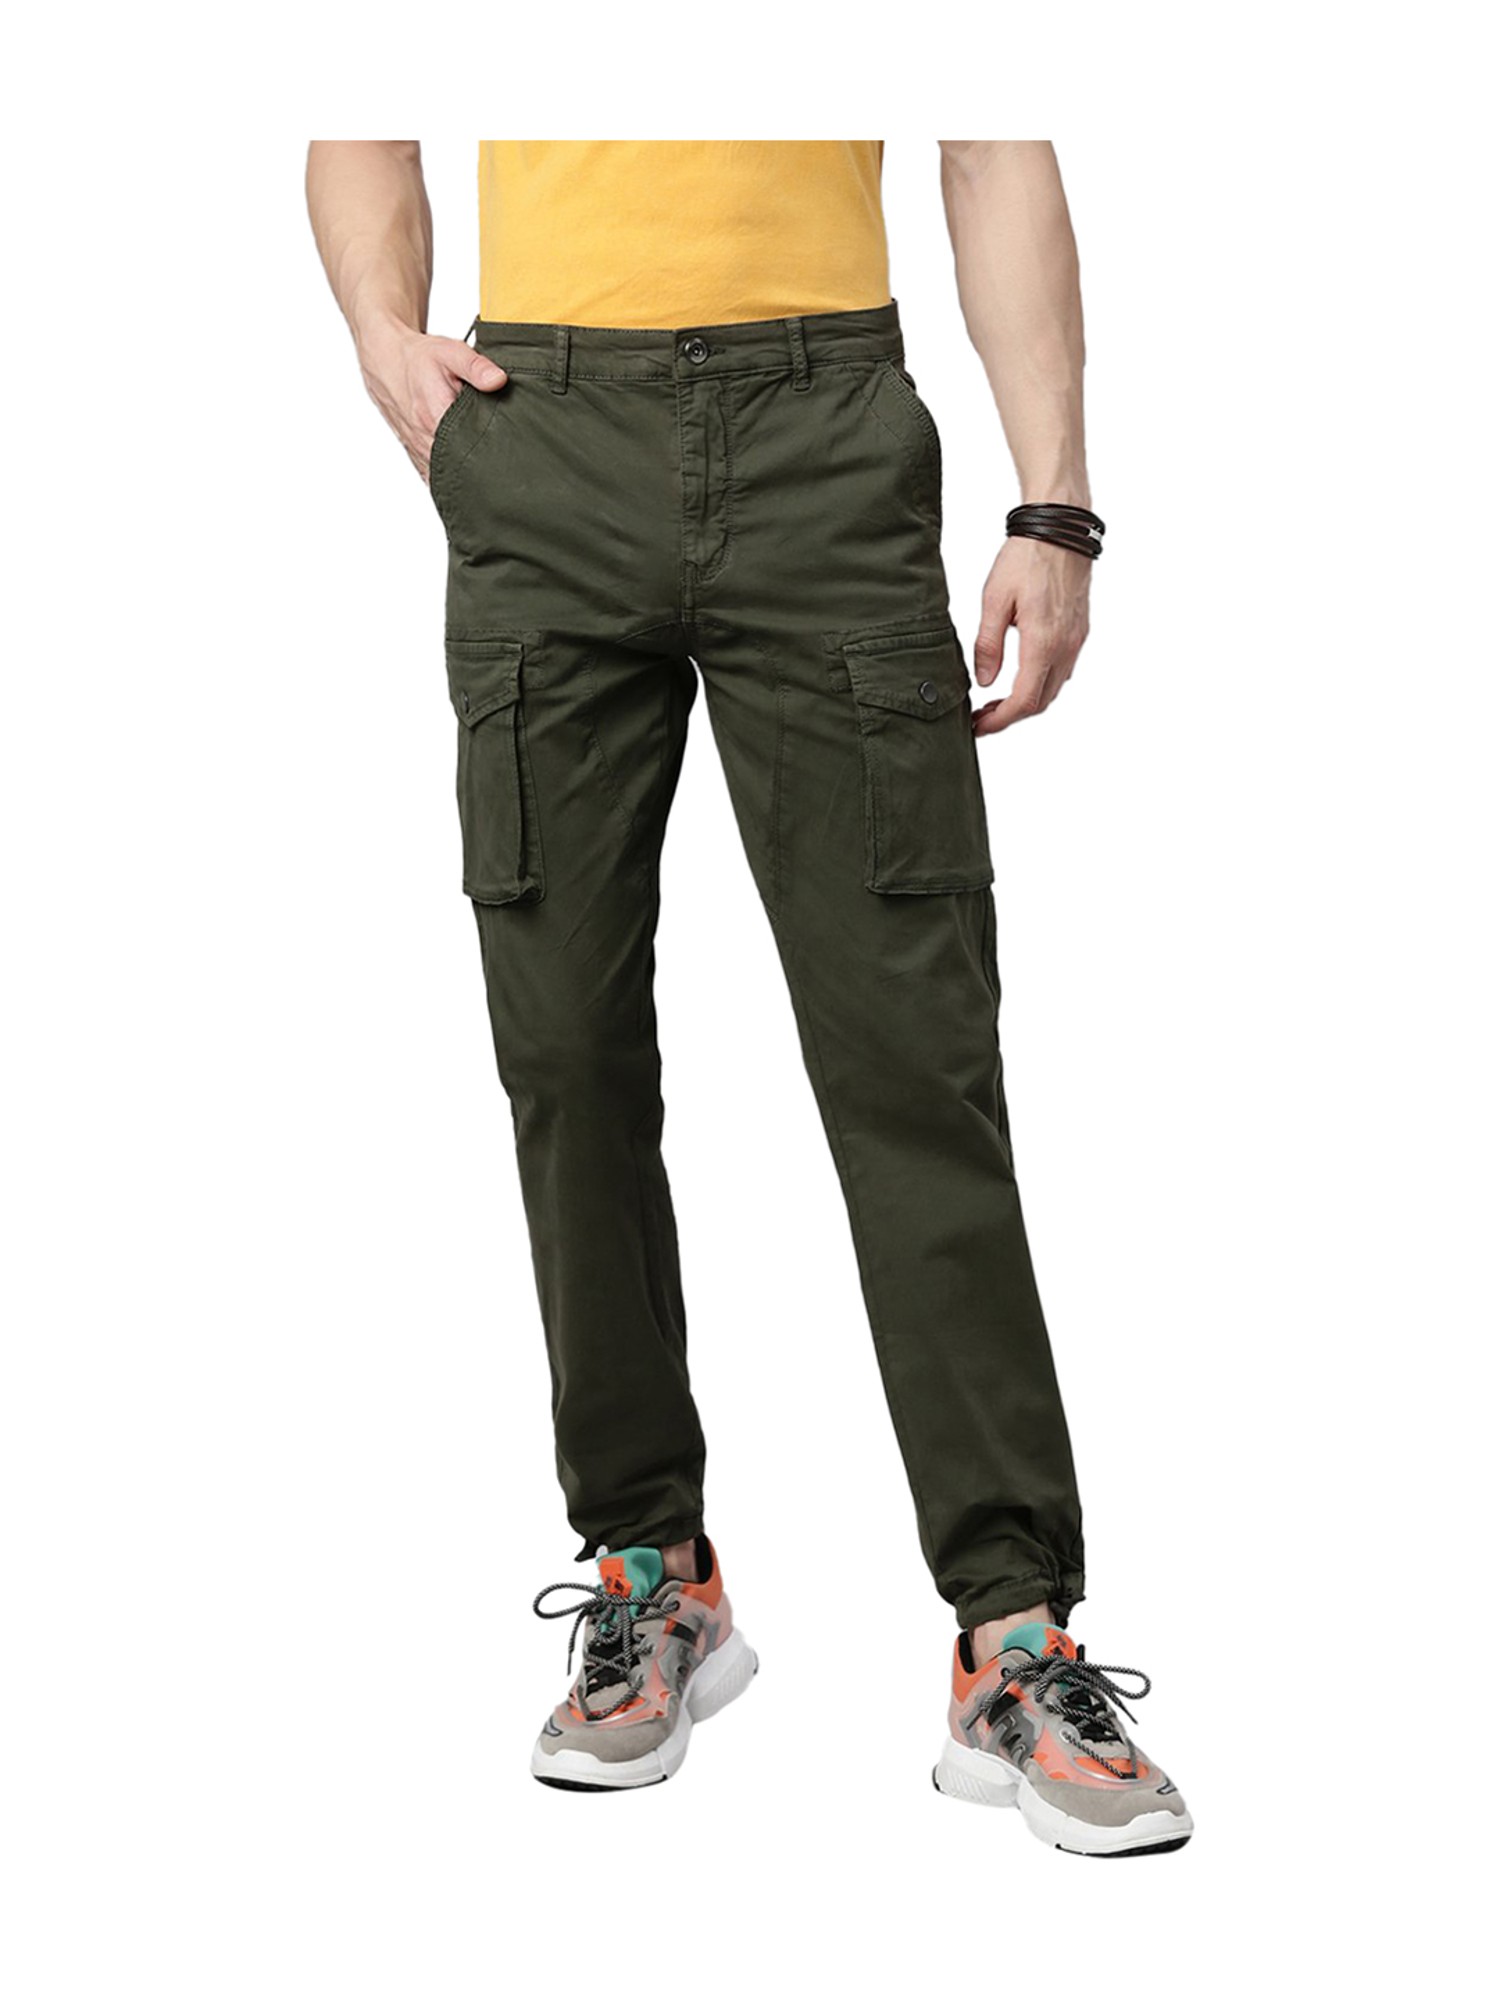 Olive Green Mens Cargo Pants